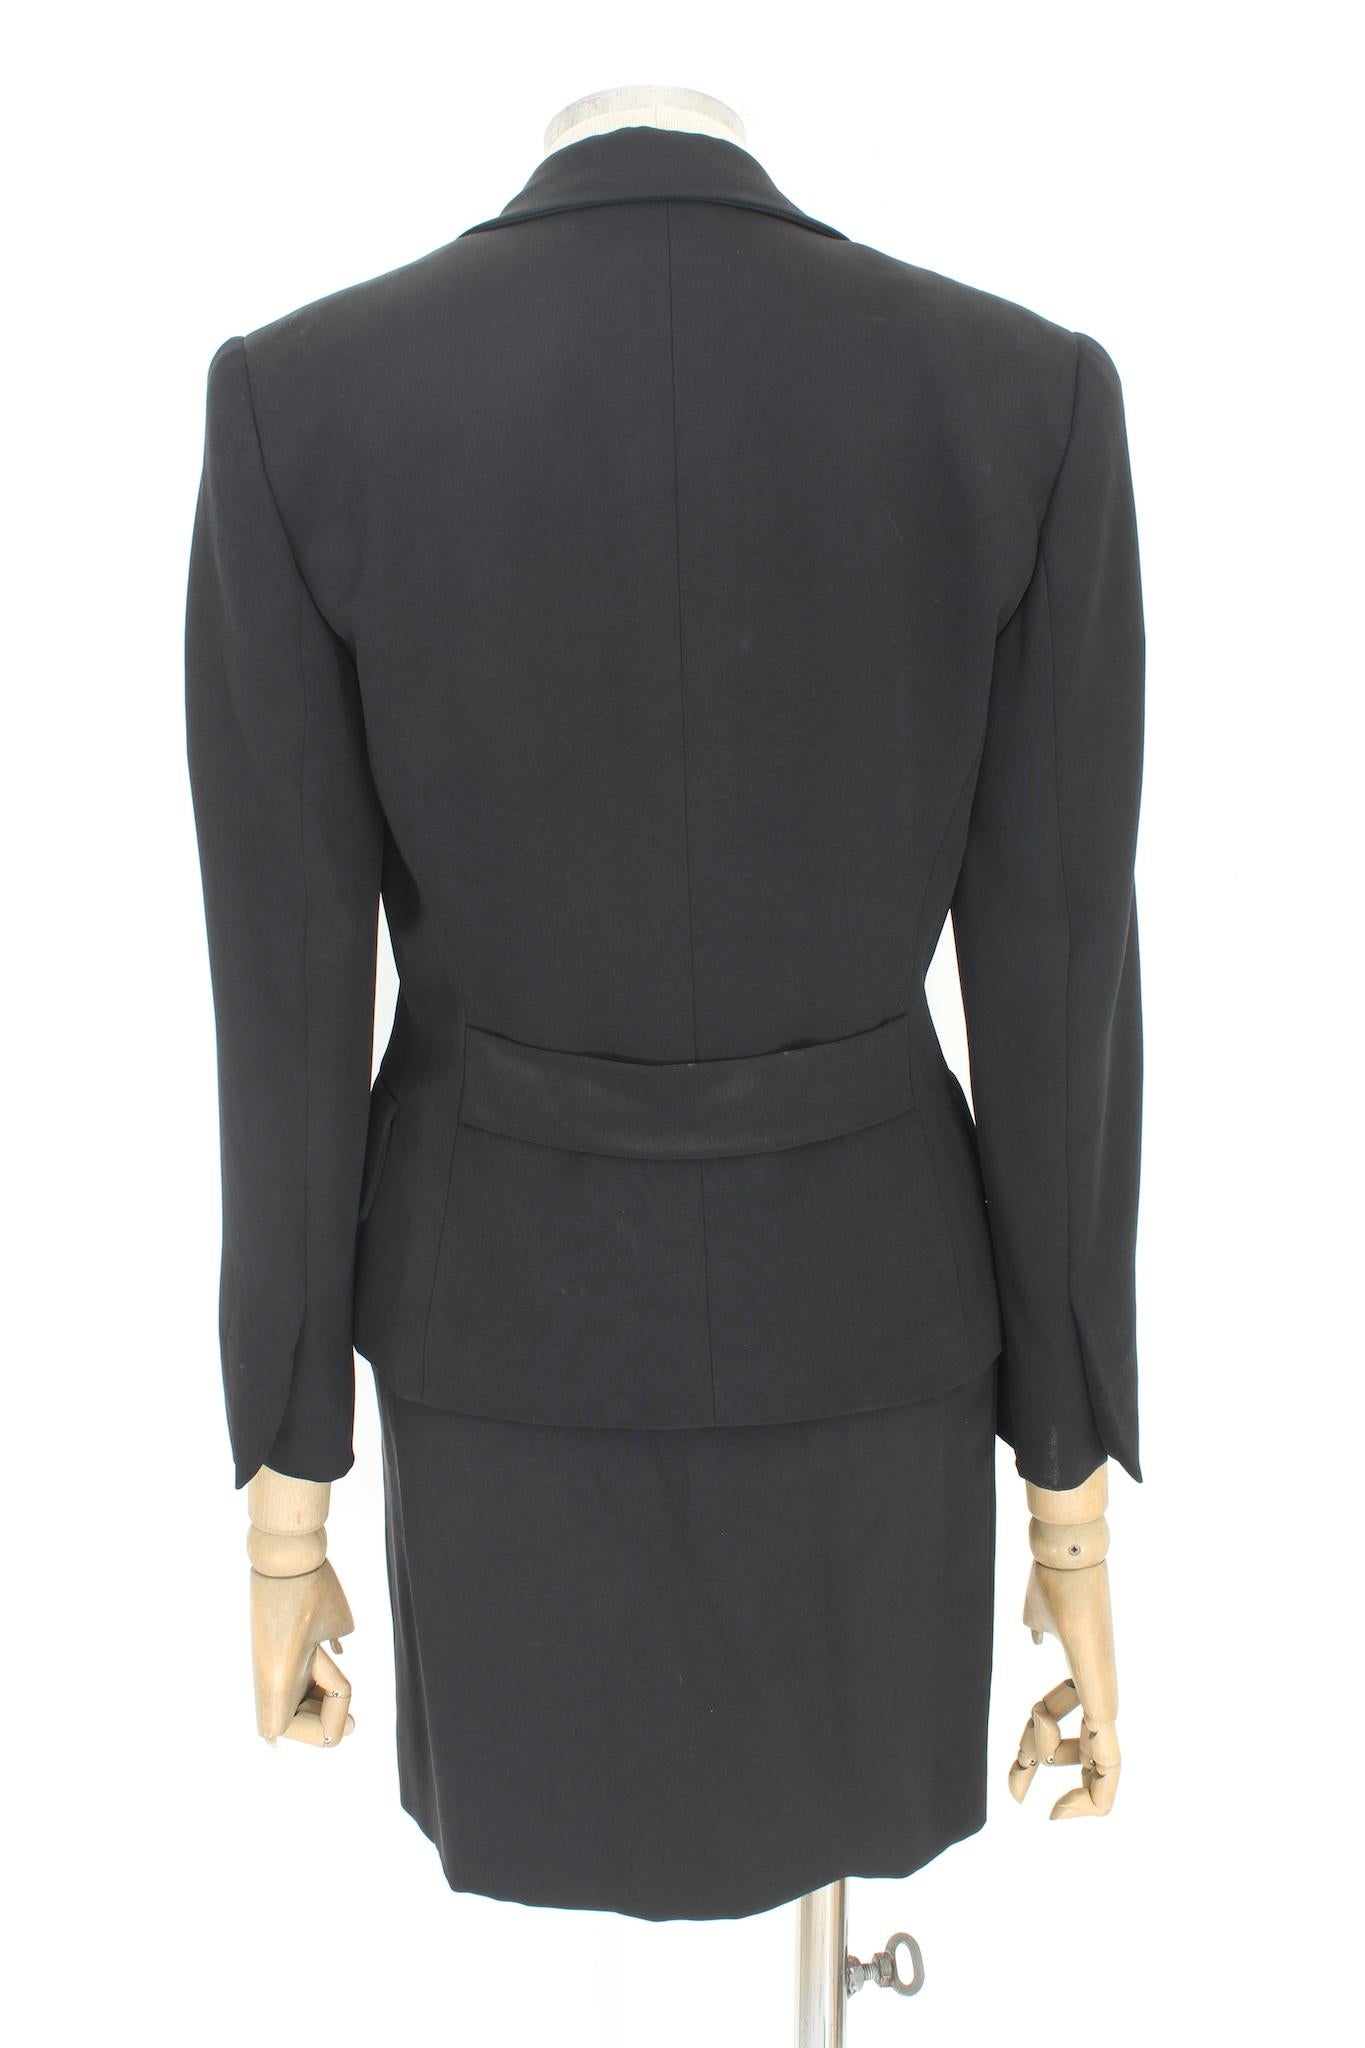 Max Mara vintage 90s skirt suit. Elegant black suit embellished with a swarosky covered button. 100% silk fabric. Made in italy.

Size: 42 It 8 Us 10 Uk

Shoulder: 44cm
Bust/Chest: 45 cm
Sleeve: 55 cm
Length: 57 cm
Skirt waist: 33 cm
Skirt length: